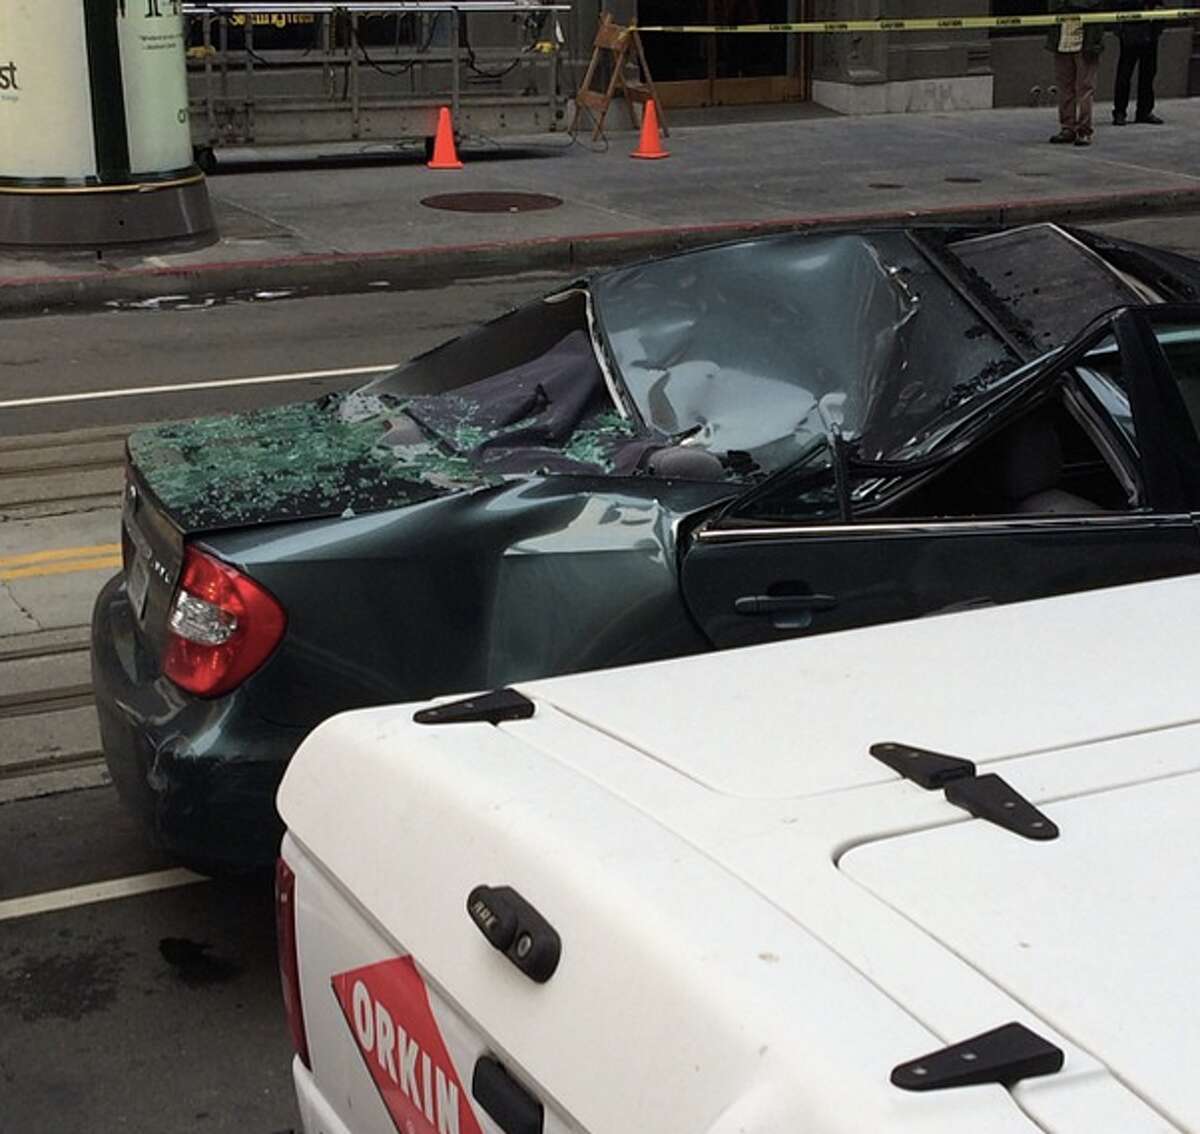 Instagram user radiopadraic posted this photo showing a car that a worker landed on after falling off a building near Montgomery and California streets in San Francisco on on Friday, November 21, 2014.